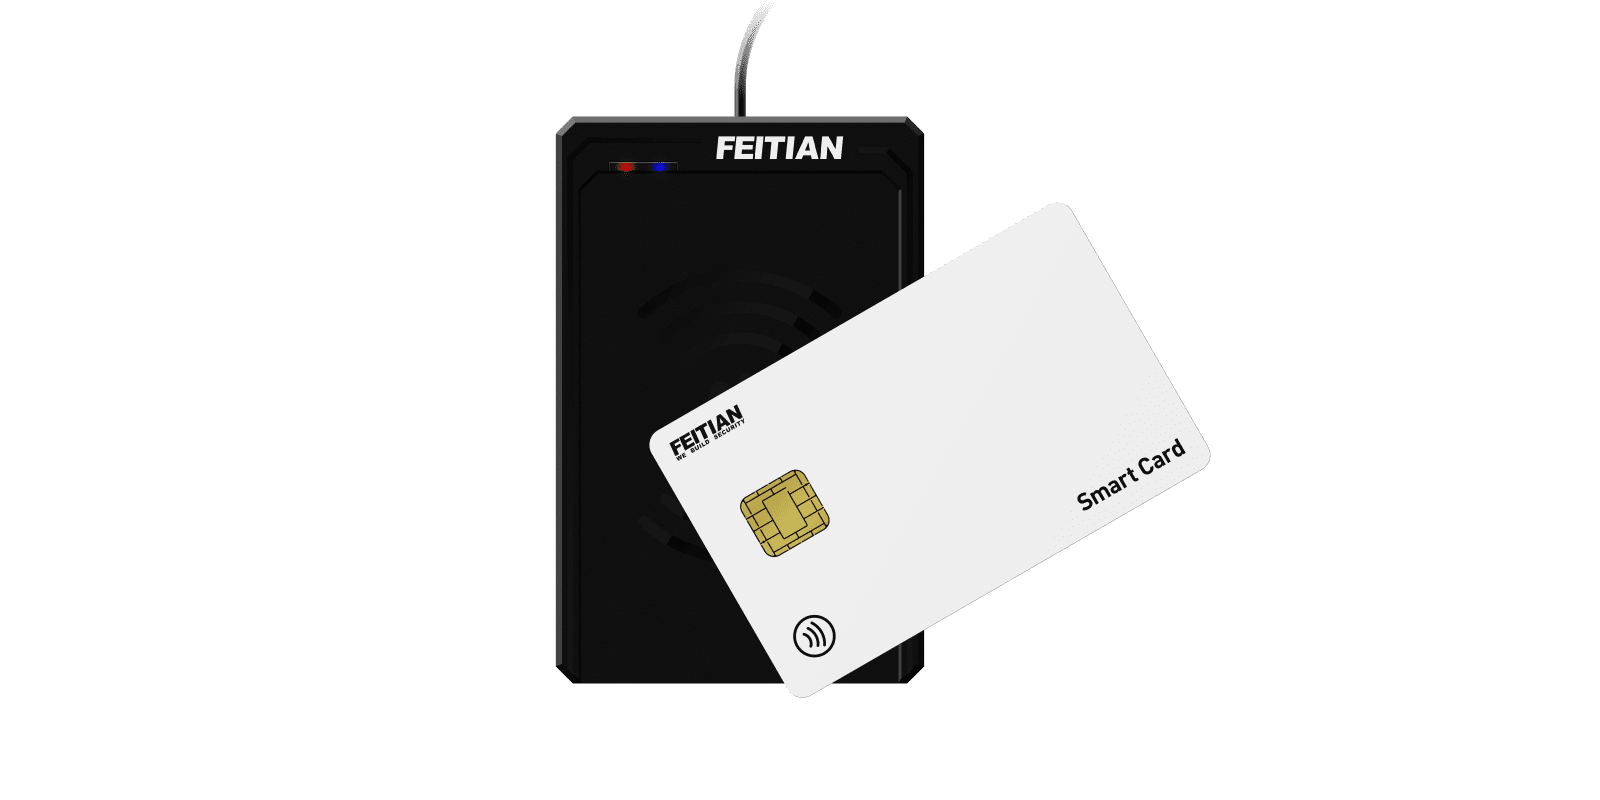 FEITIAN aR530 Audiojack NFC SMART CARD Mobile Reader by Tx Systems 